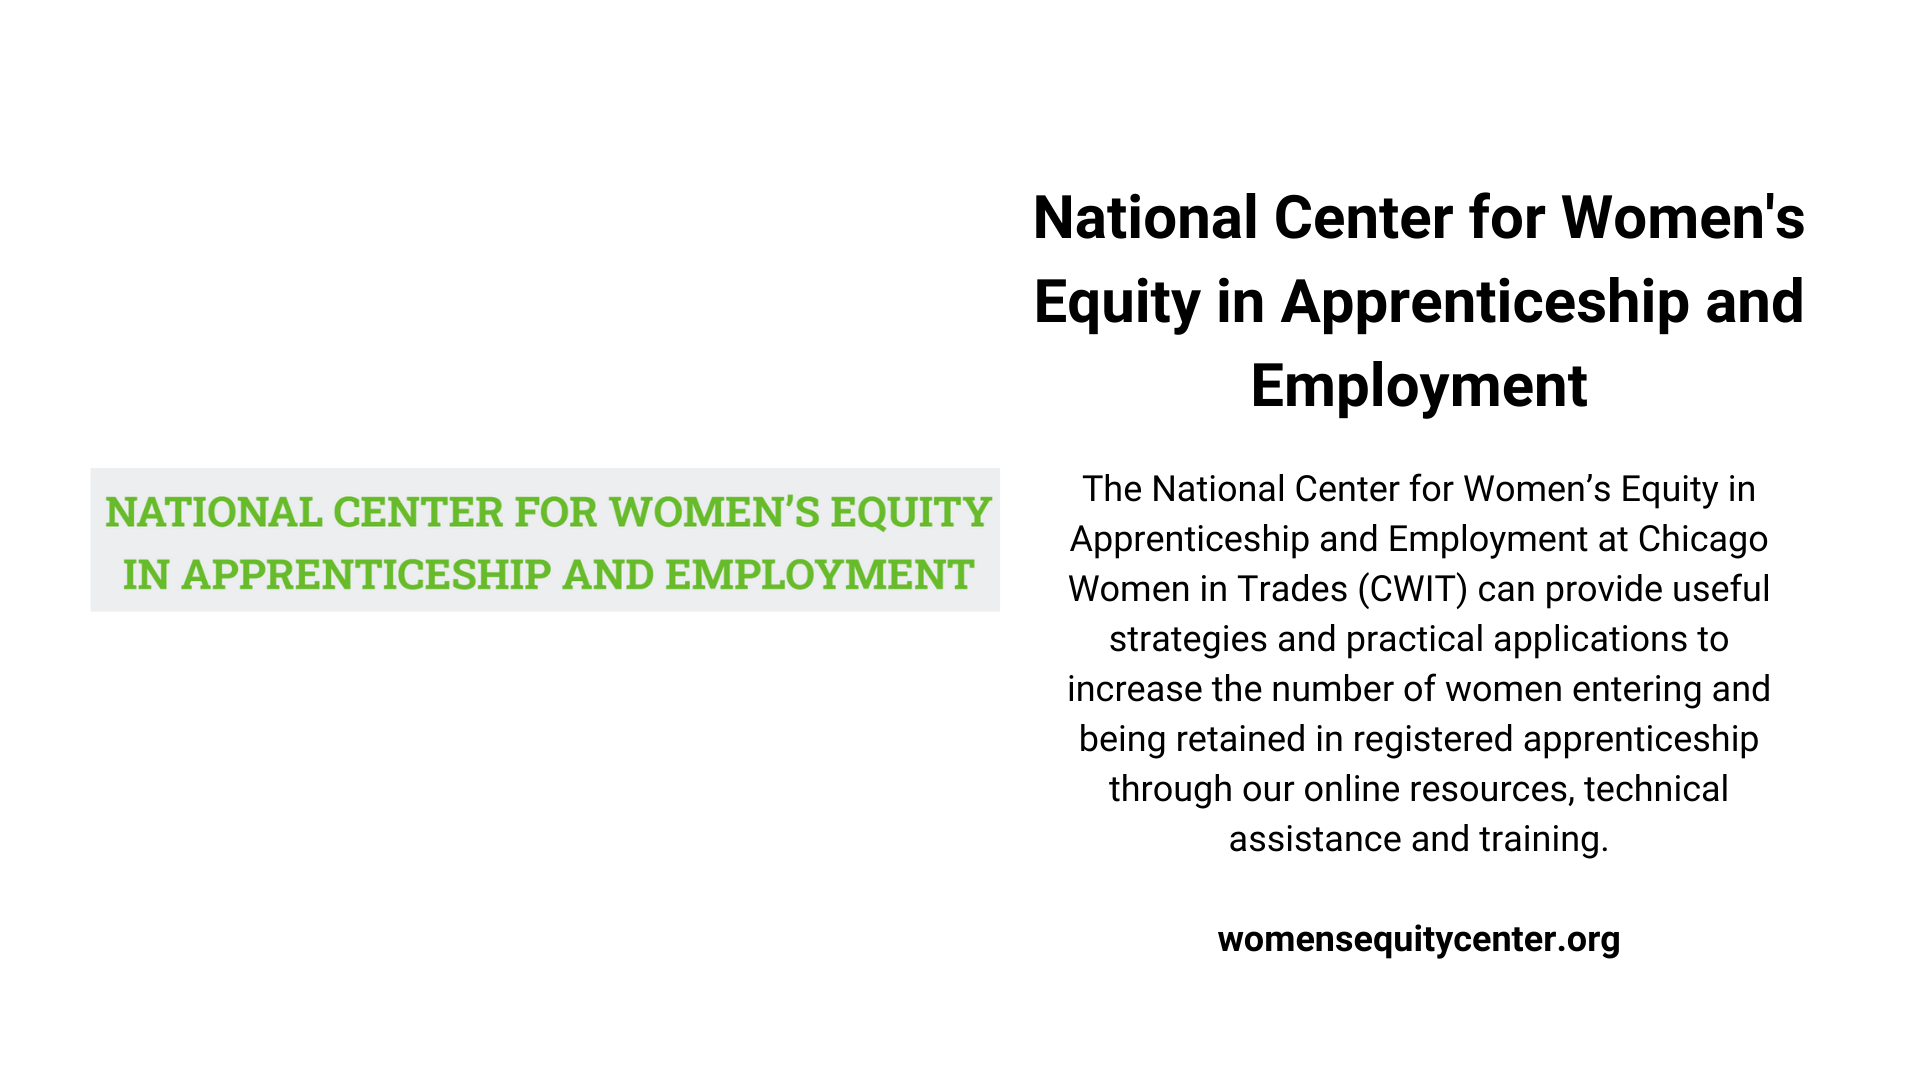 National Center for Women's Equity in Apprenticeship and Employment